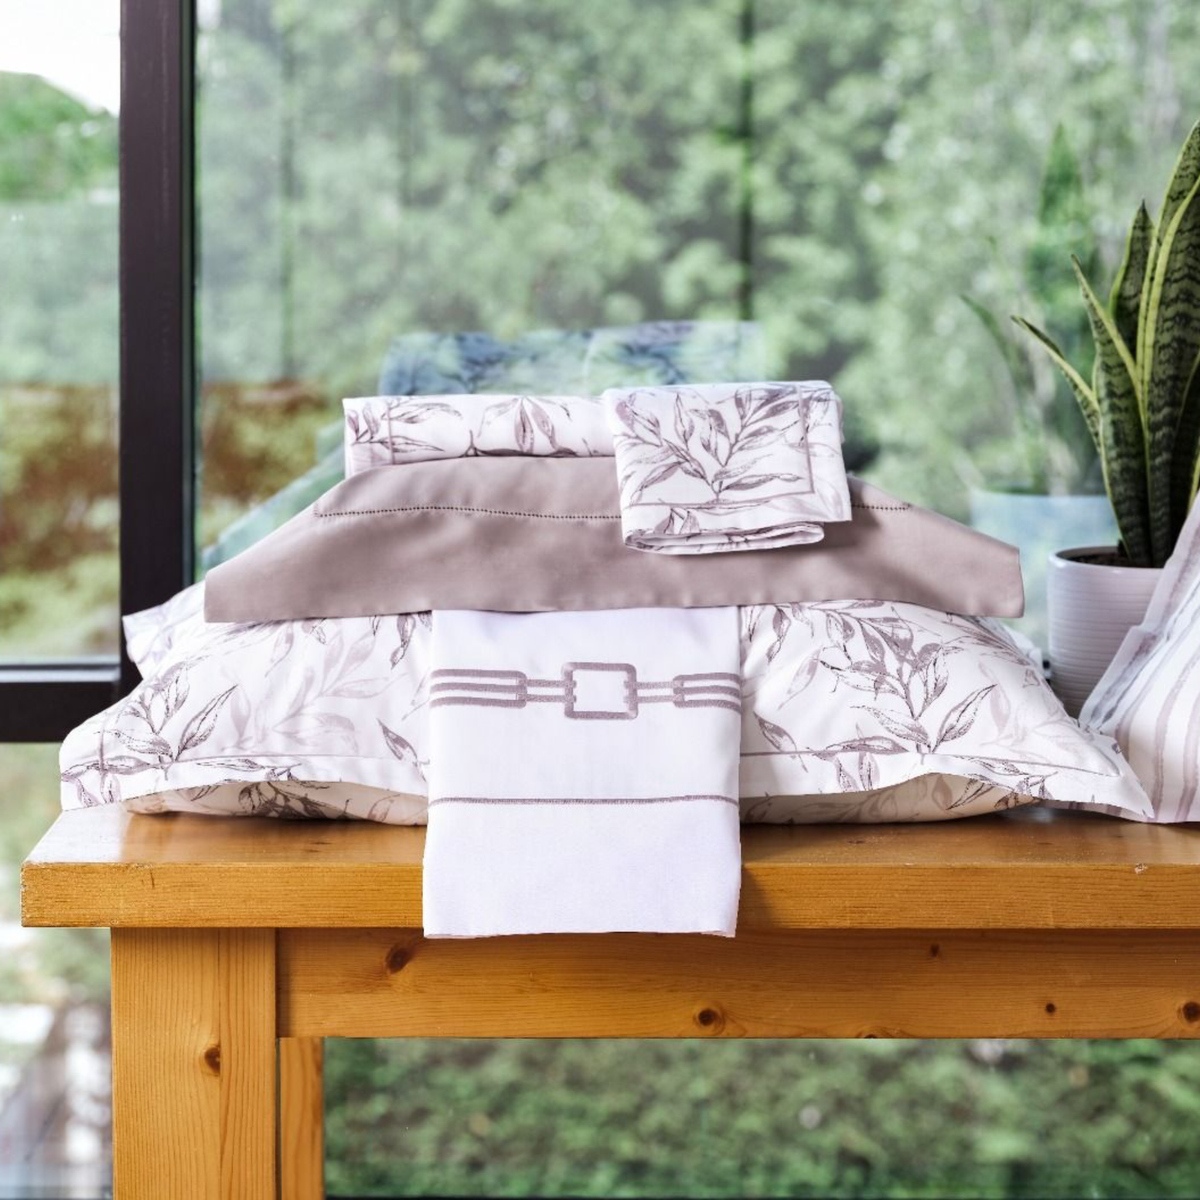 Signoria Natura Bedding in Thistle Color with Complimentary Collections